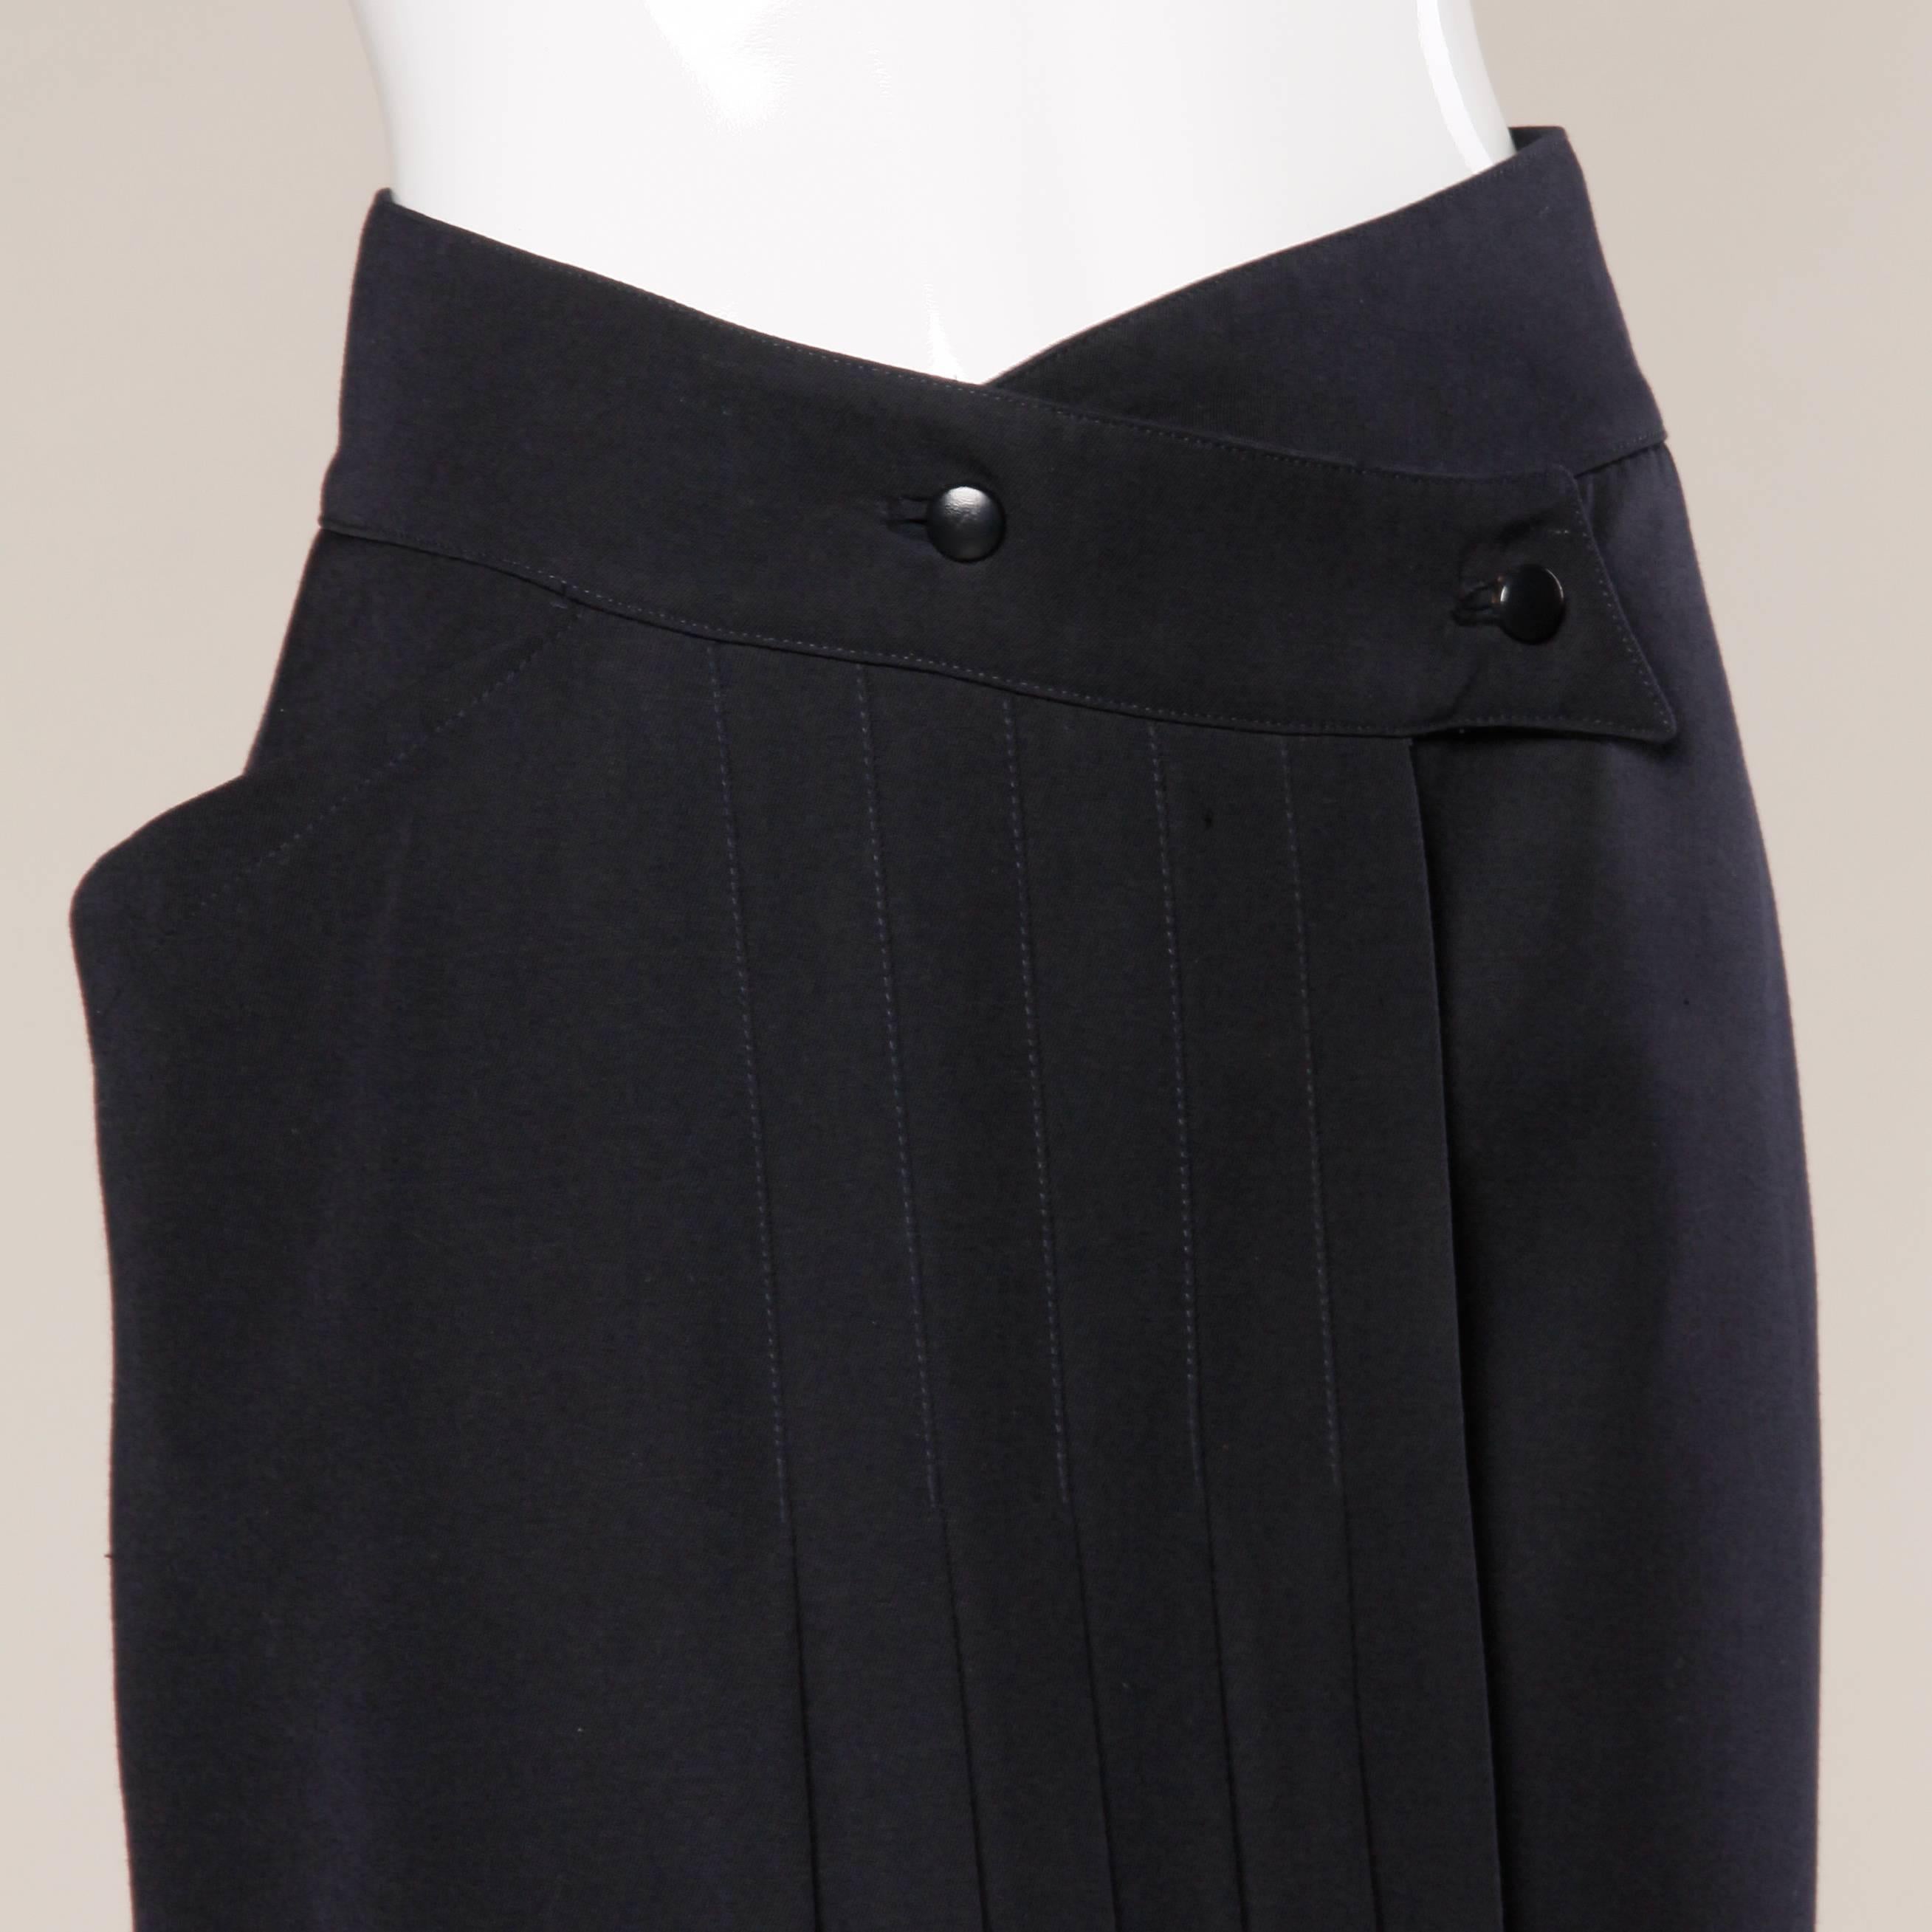 Gorgeous vintage navy blue wool avant garde skirt by Claude Montana. Unique cut with pleating and one side pocket. Fully lined with front button closure. The marked size is a US 6. The skirt fits true to the marked size. The measurements are as